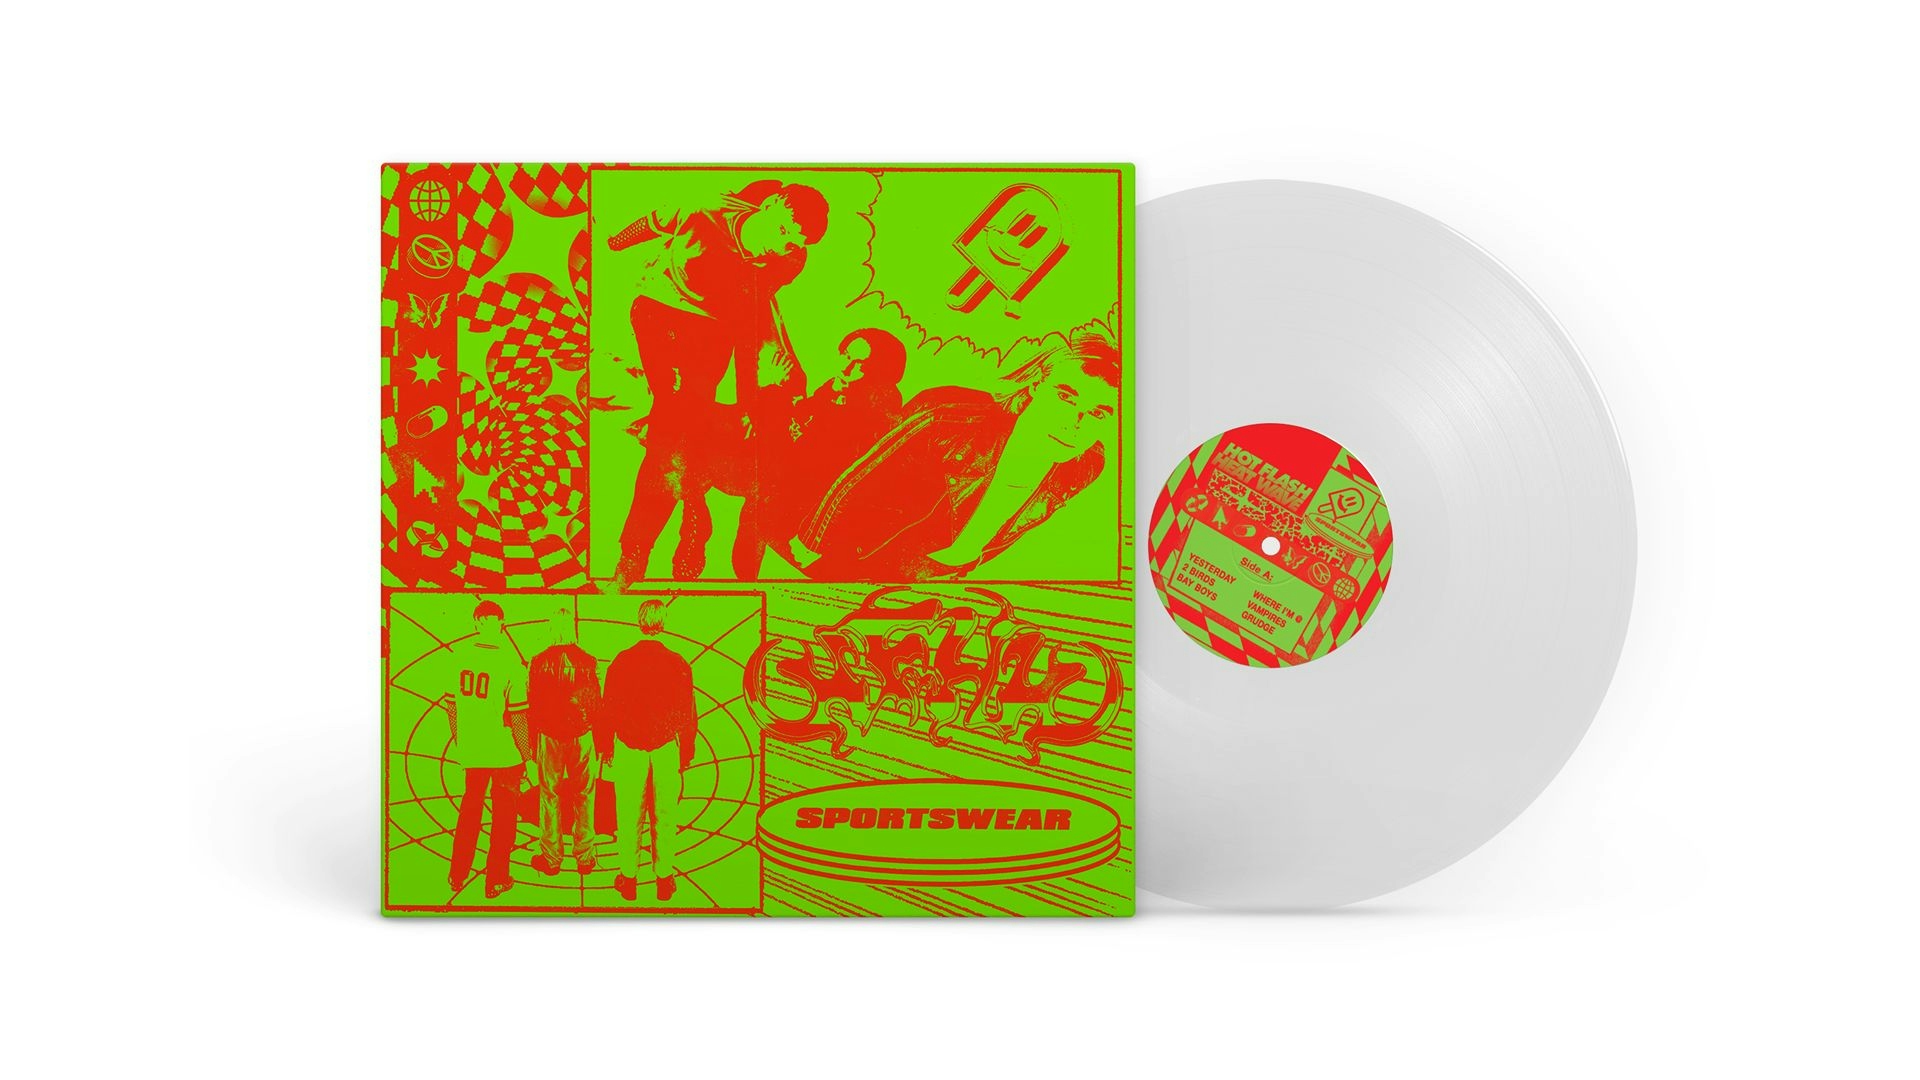 Hot flash Heat Wave Sportswear record sleeve and vinyl in green and red